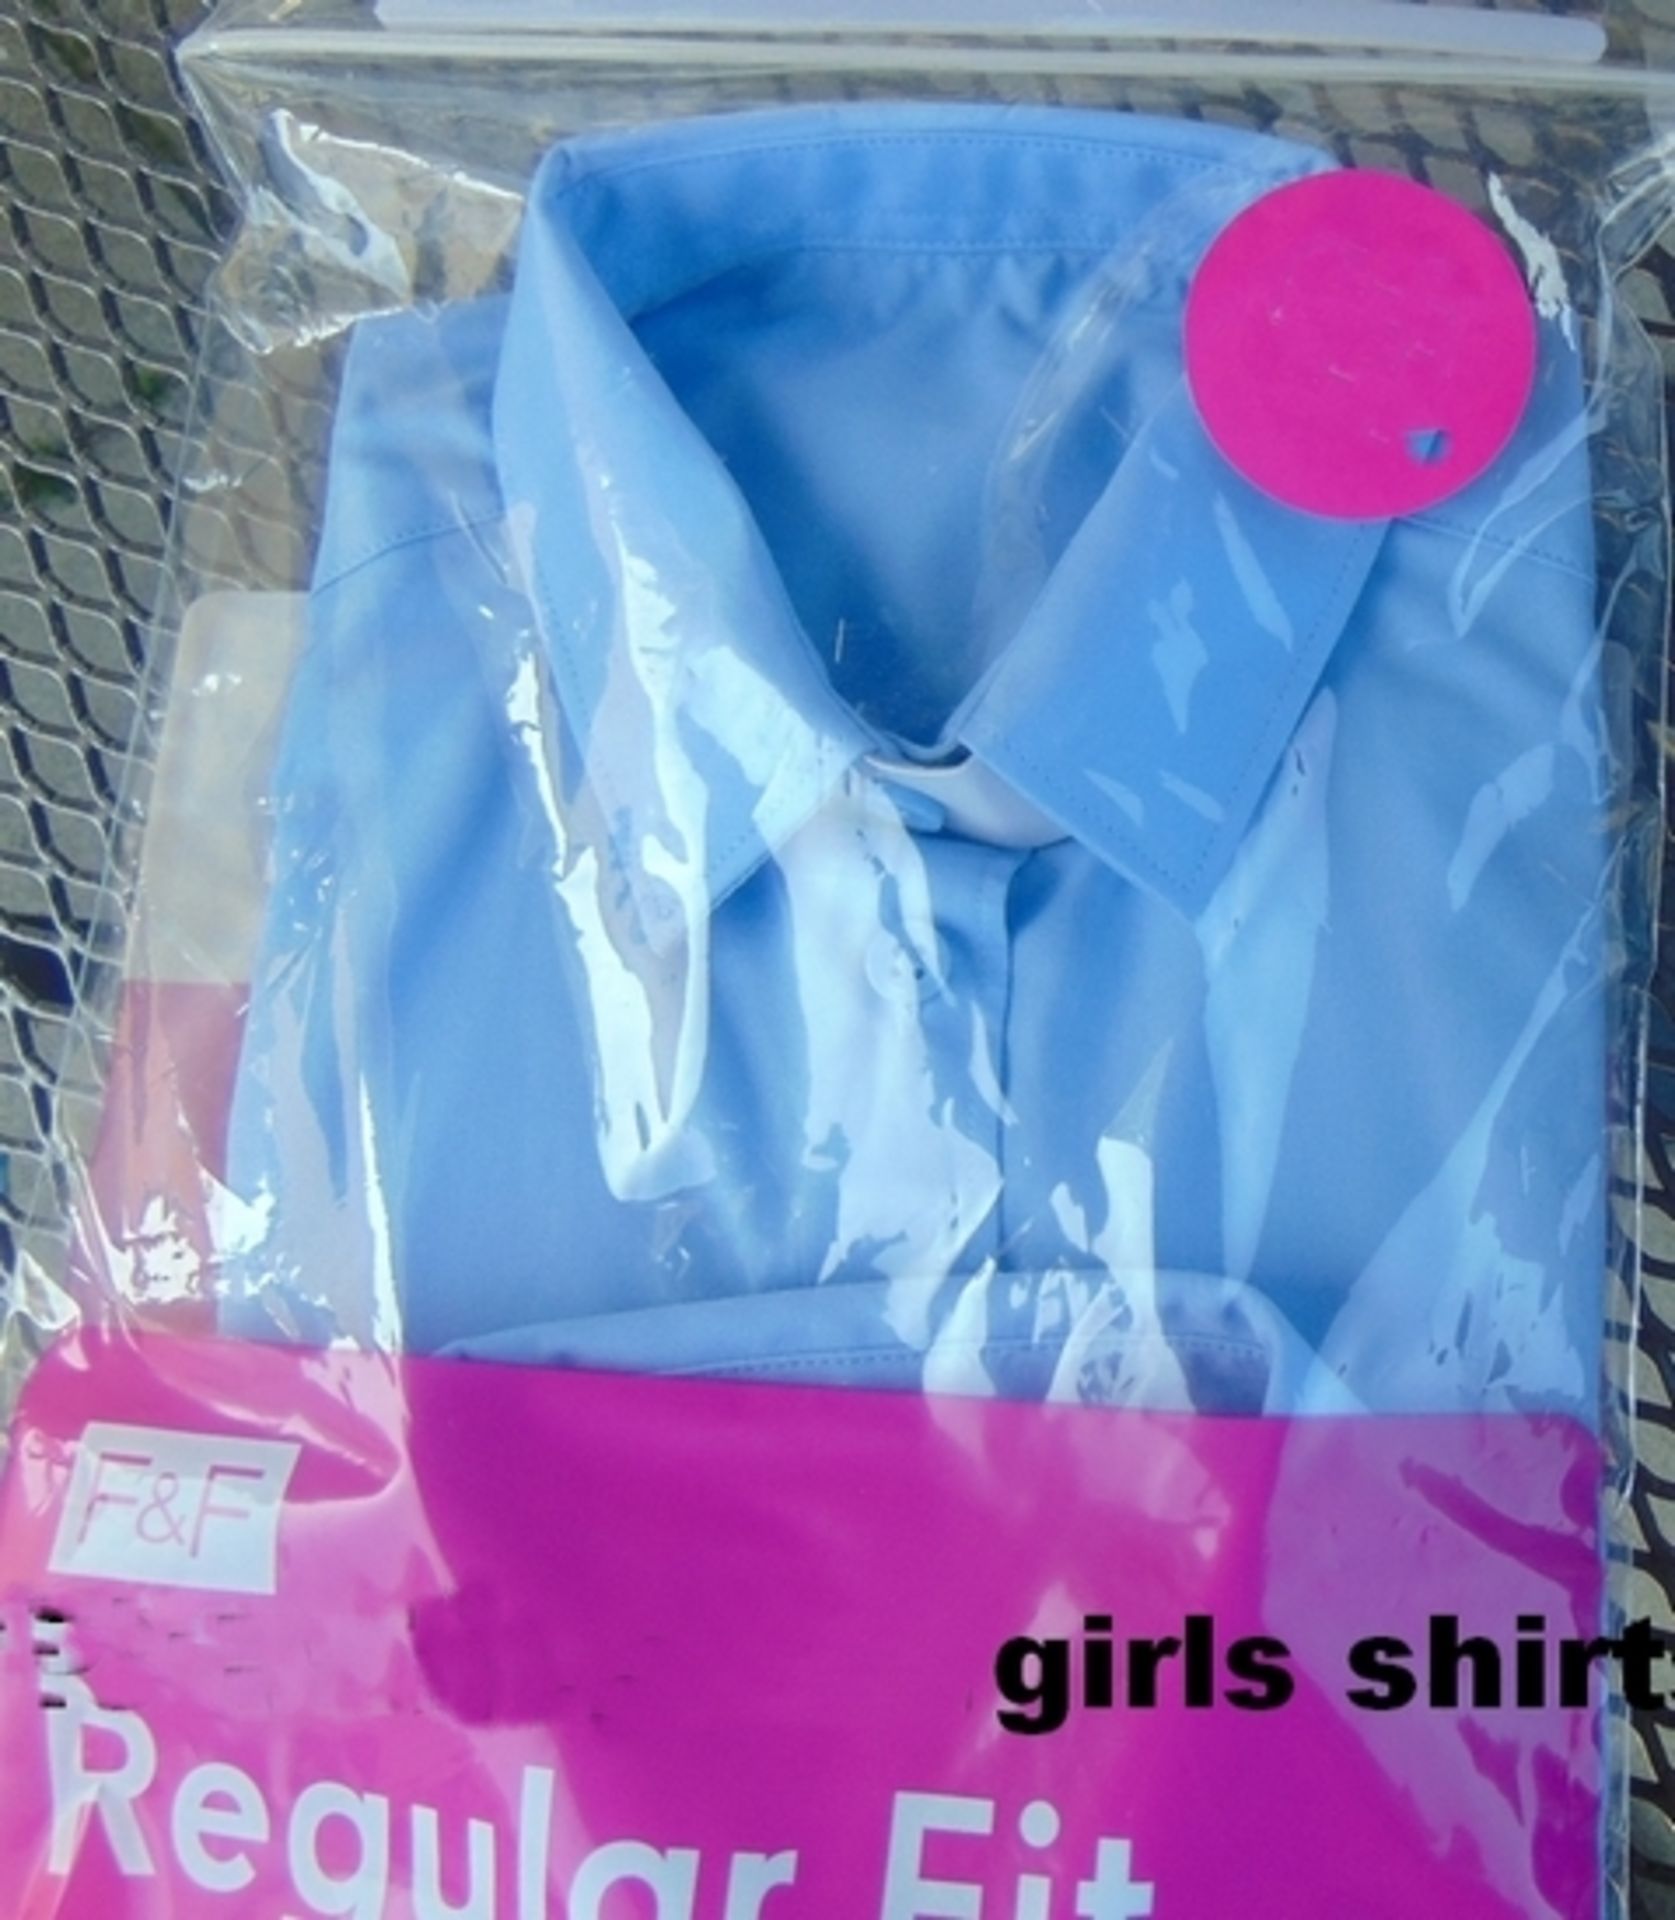 20 Mixed Girls And Boys Twin Packs Of Shirts Sizes From 6 To 15 - Image 2 of 2